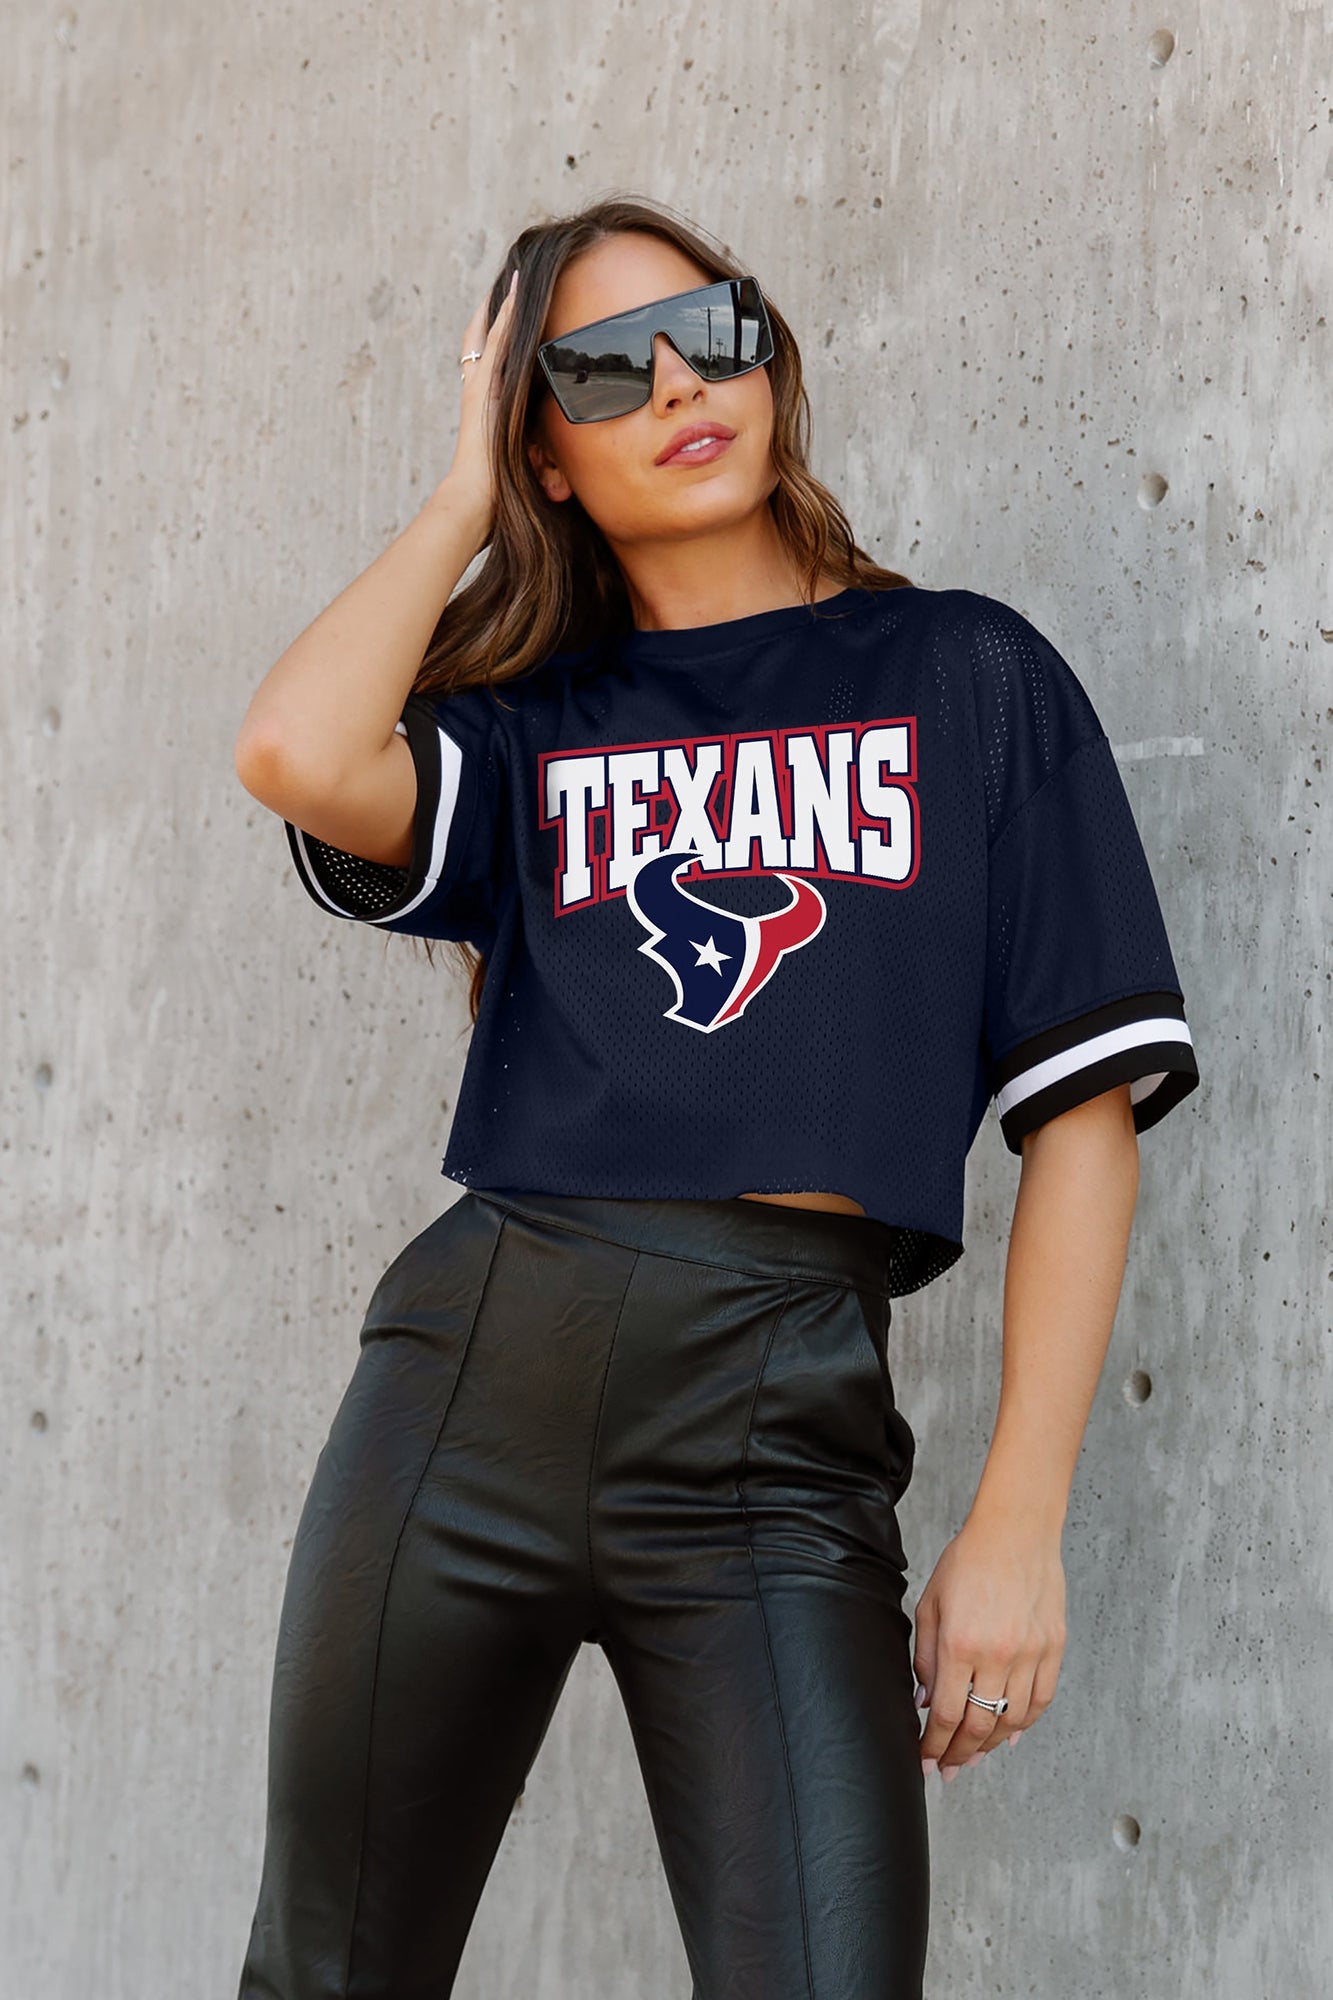 HOUSTON TEXANS AUTOMATIC DOWN LIGHTWEIGHT SPORTY TOP WITH STRIPED